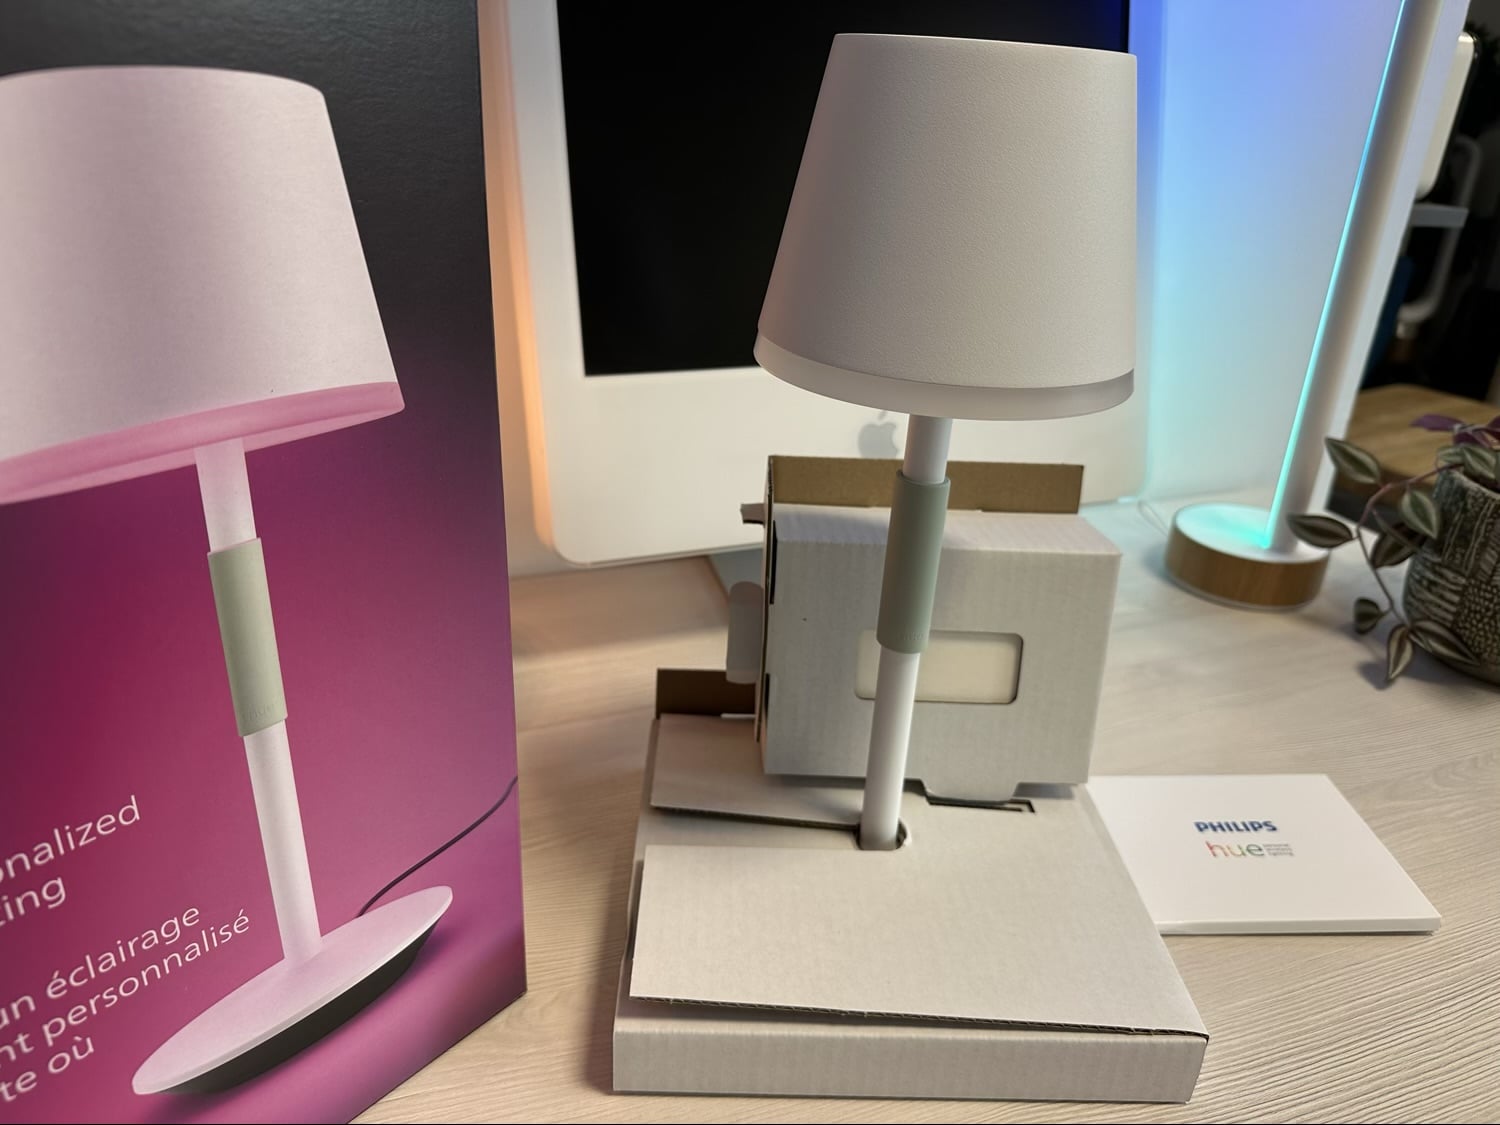 Unboxed: The new Philips Hue Smart Plug 